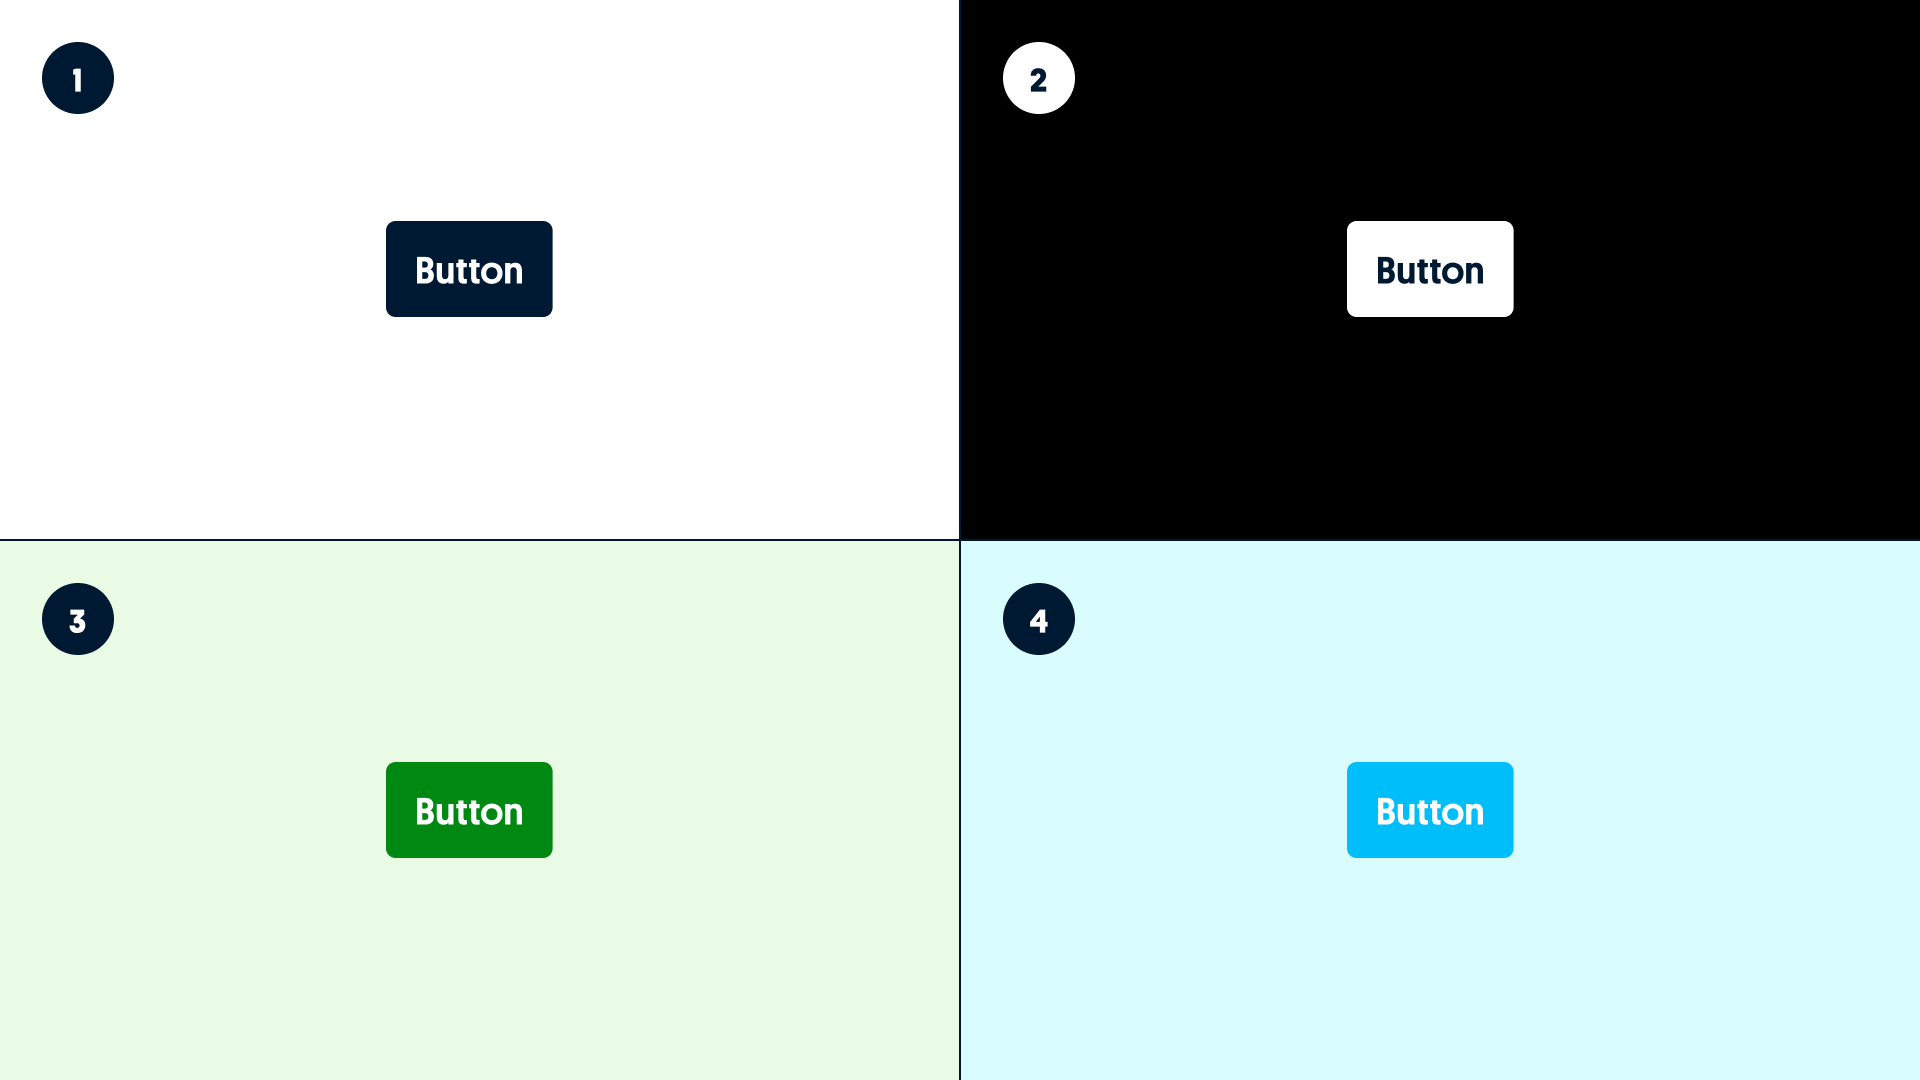 Primary buttons